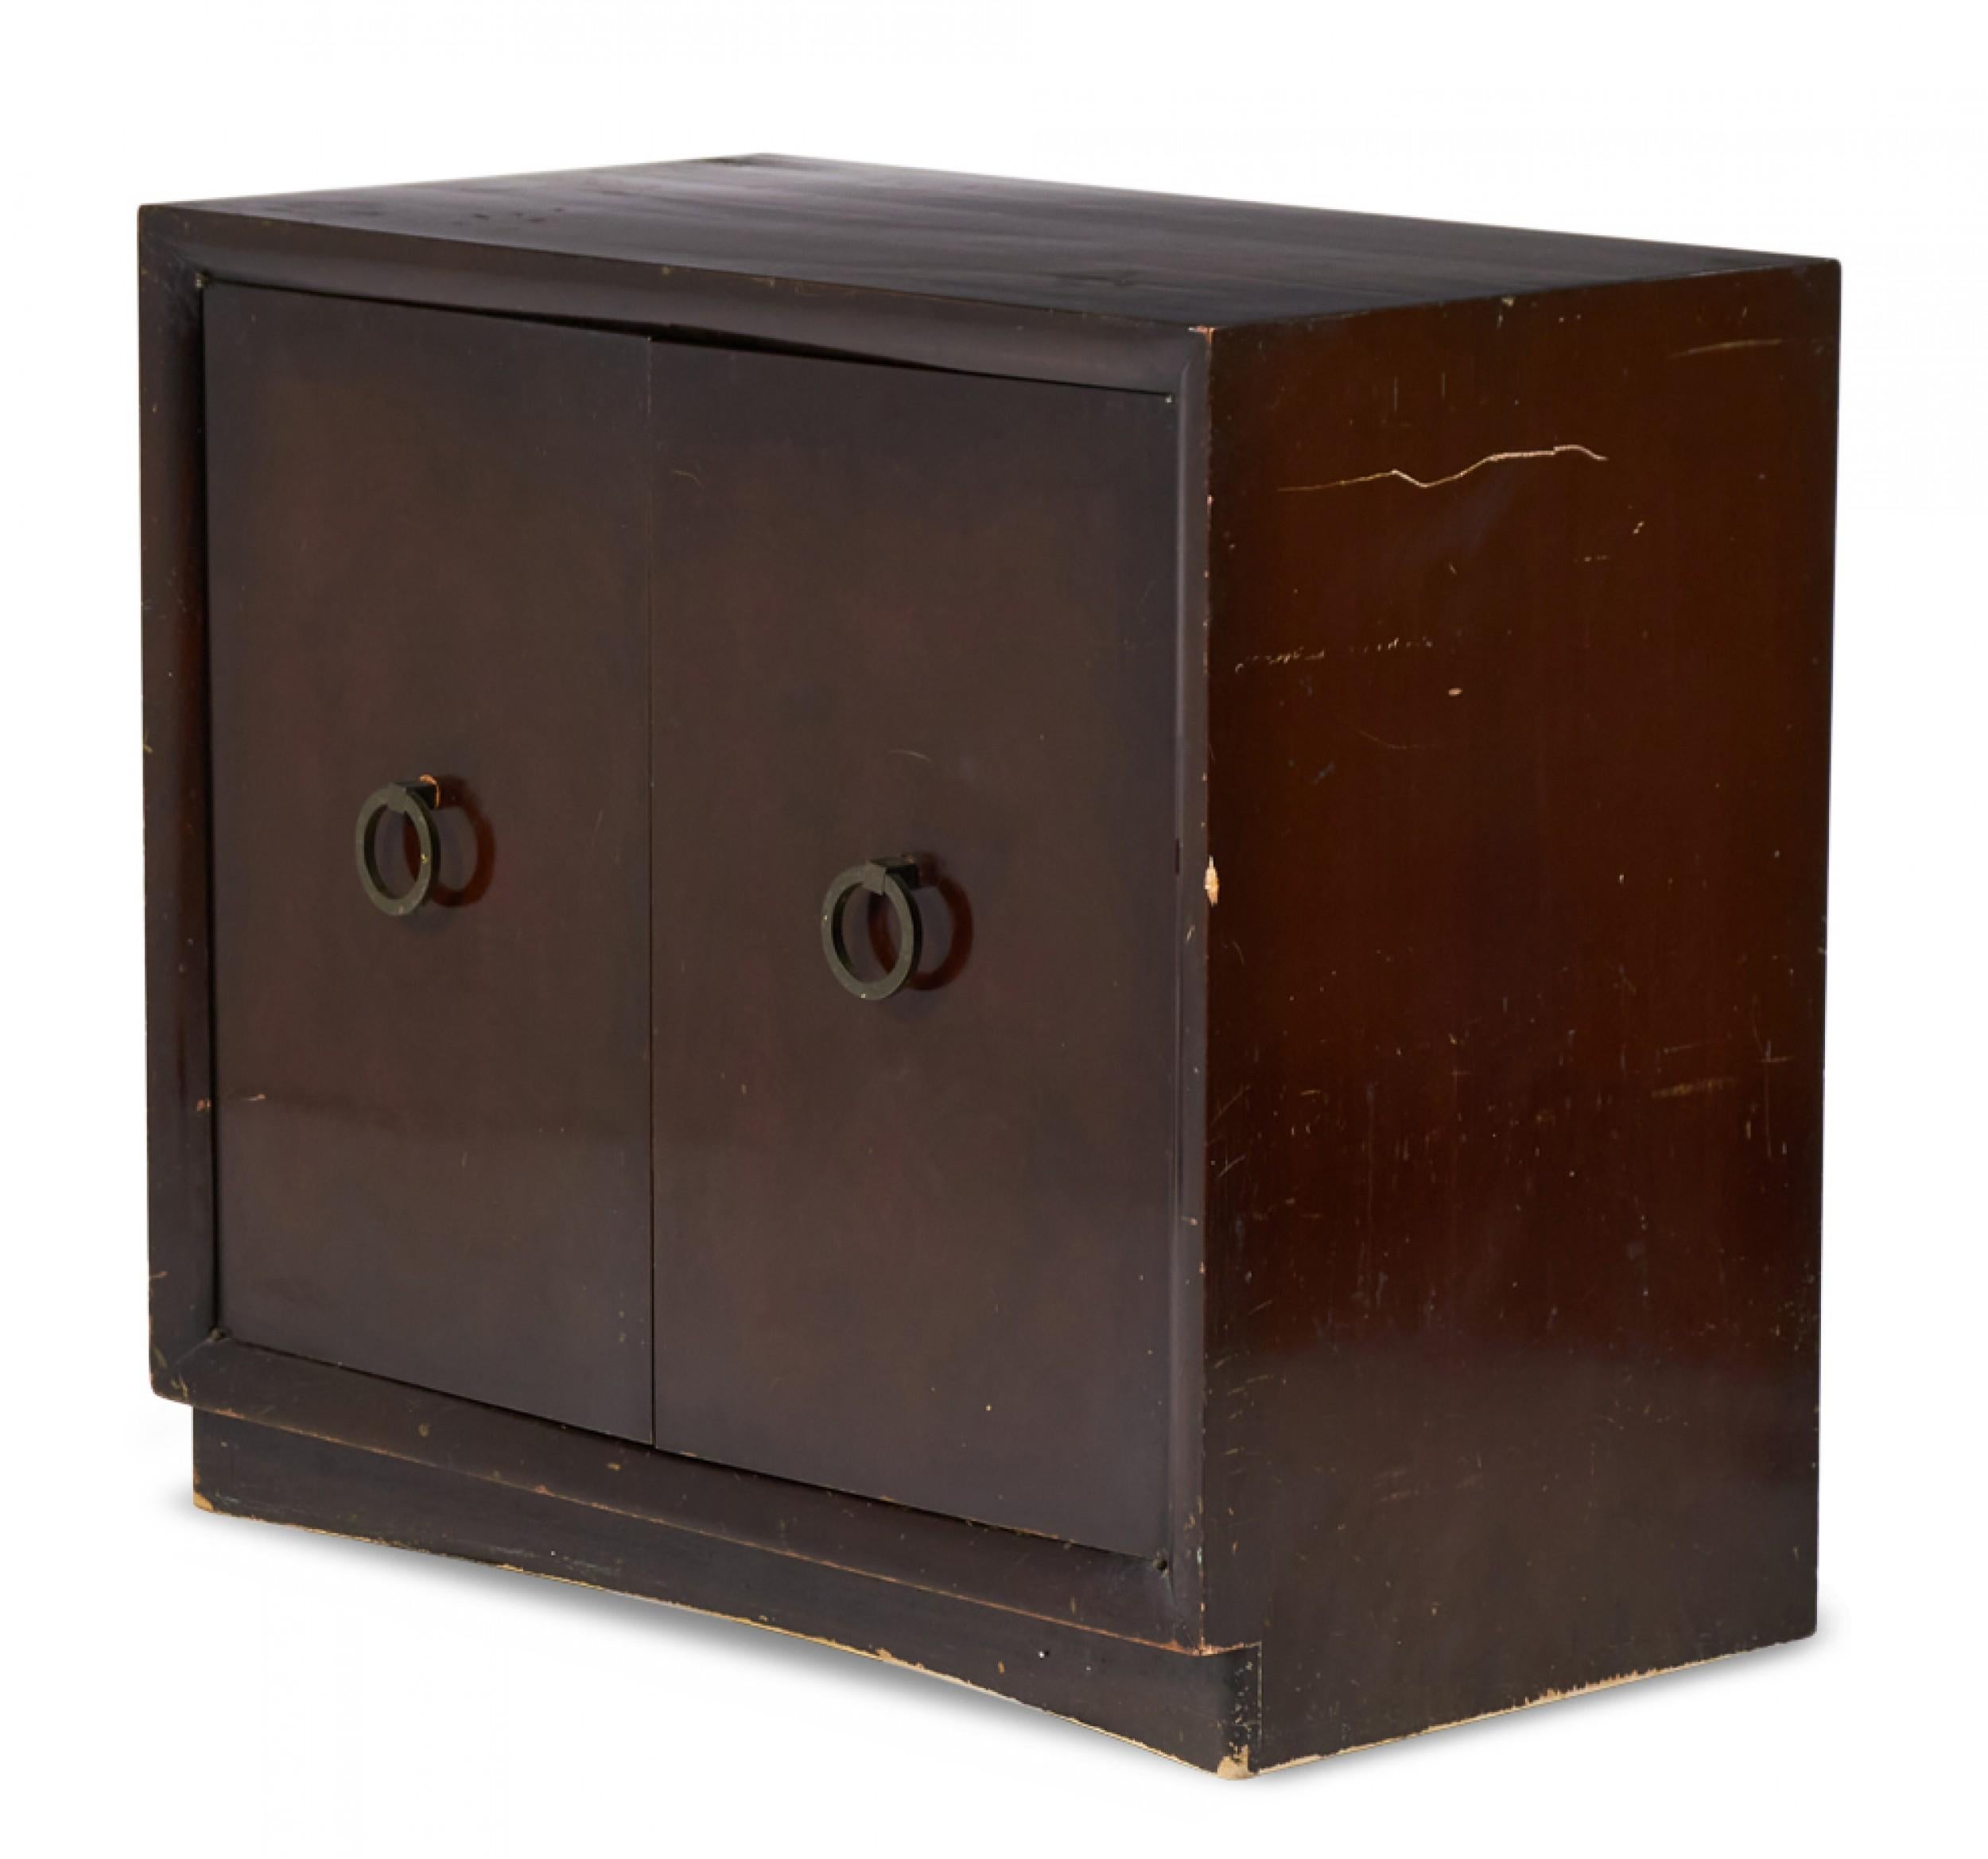 American Mid-Century (1950s) two-door mahogany cabinet with brass ring-shaped door pulls, resting on four small concealed casters. (T.H. ROBSJOHN-GIBBINGS FOR WIDDICOMB MODERN).
 